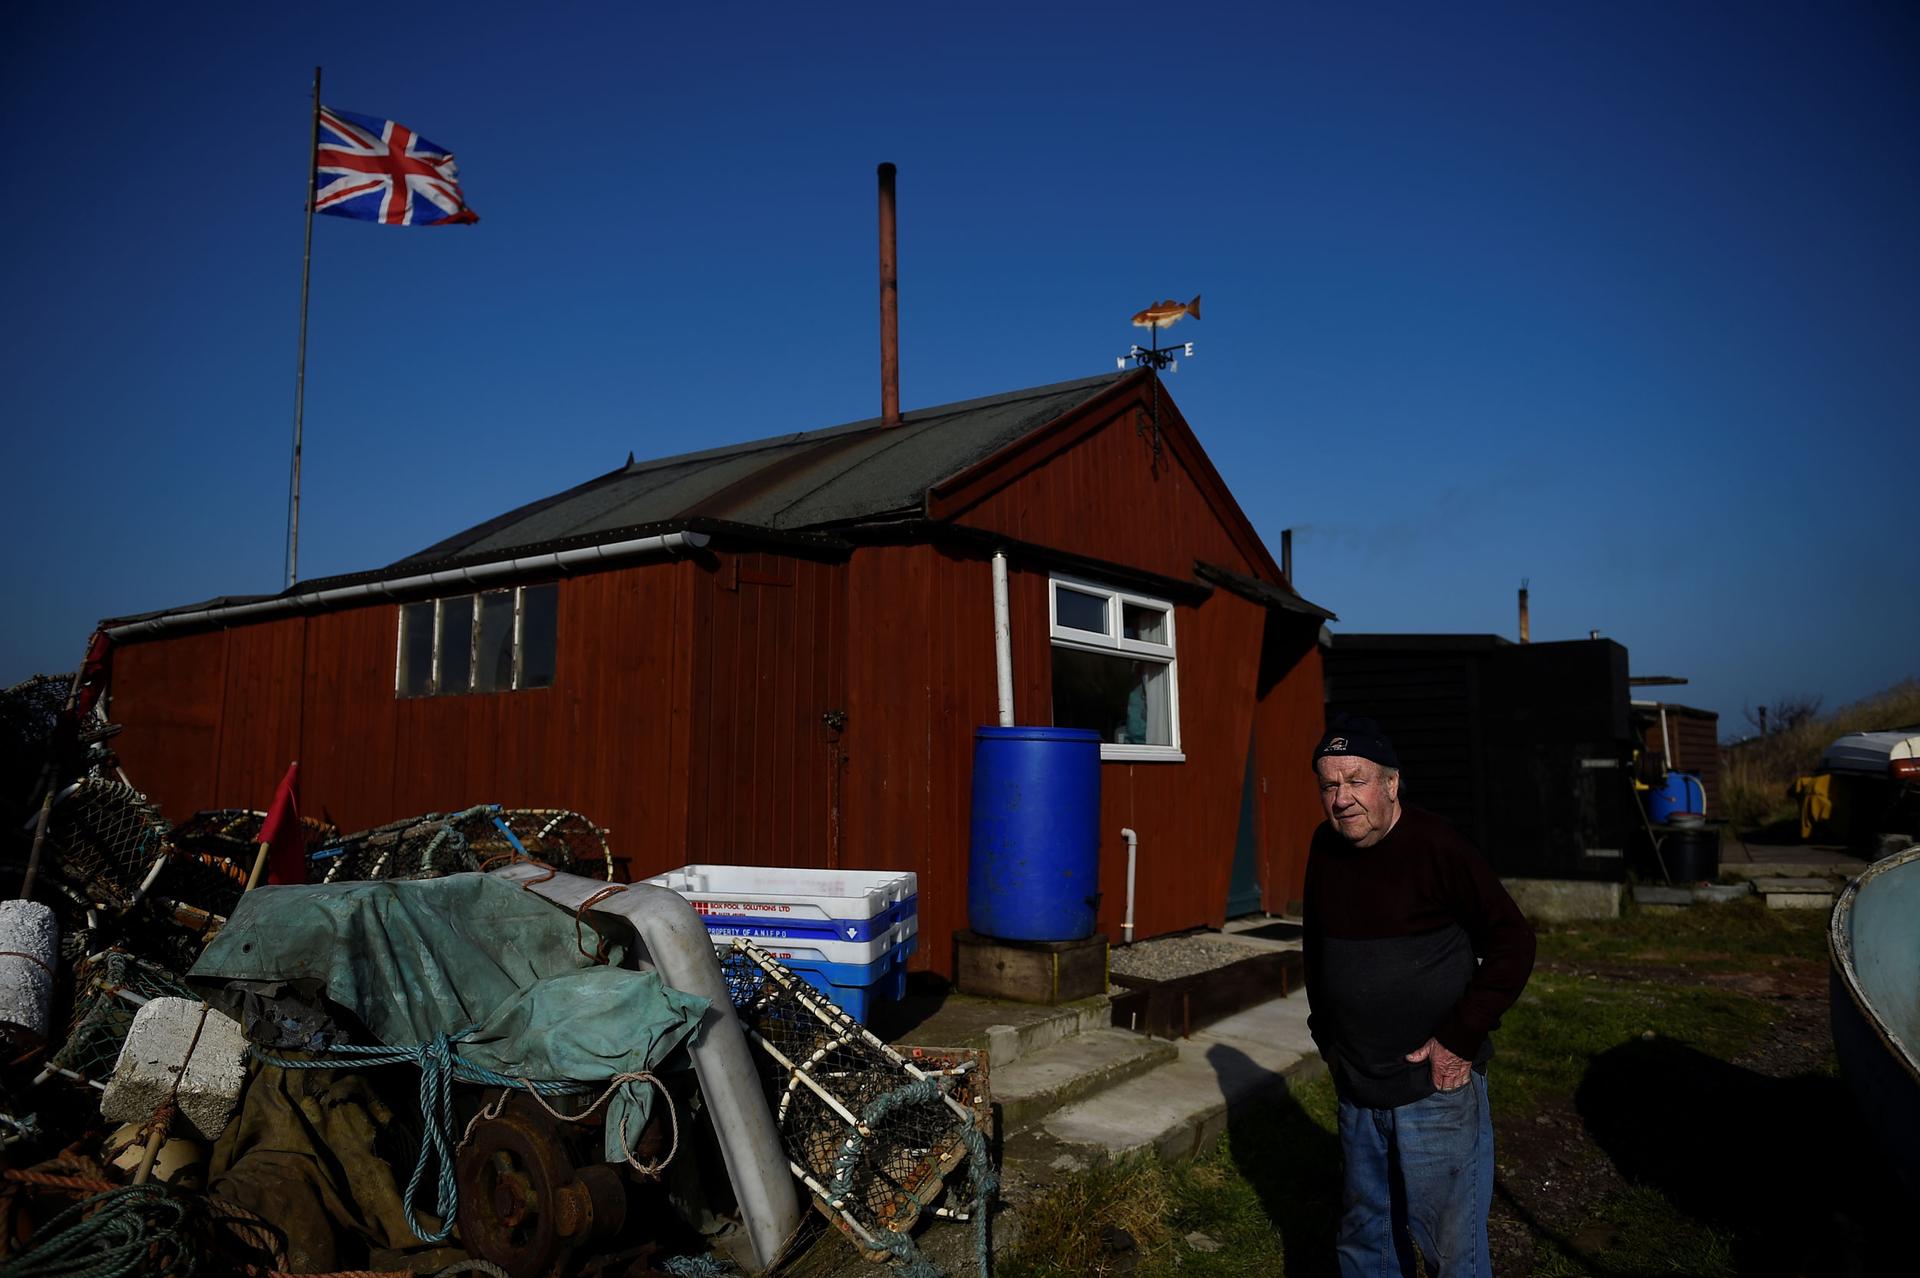 Mohan walks by a red, wooden fishing hut that has a British flag flying behind it.